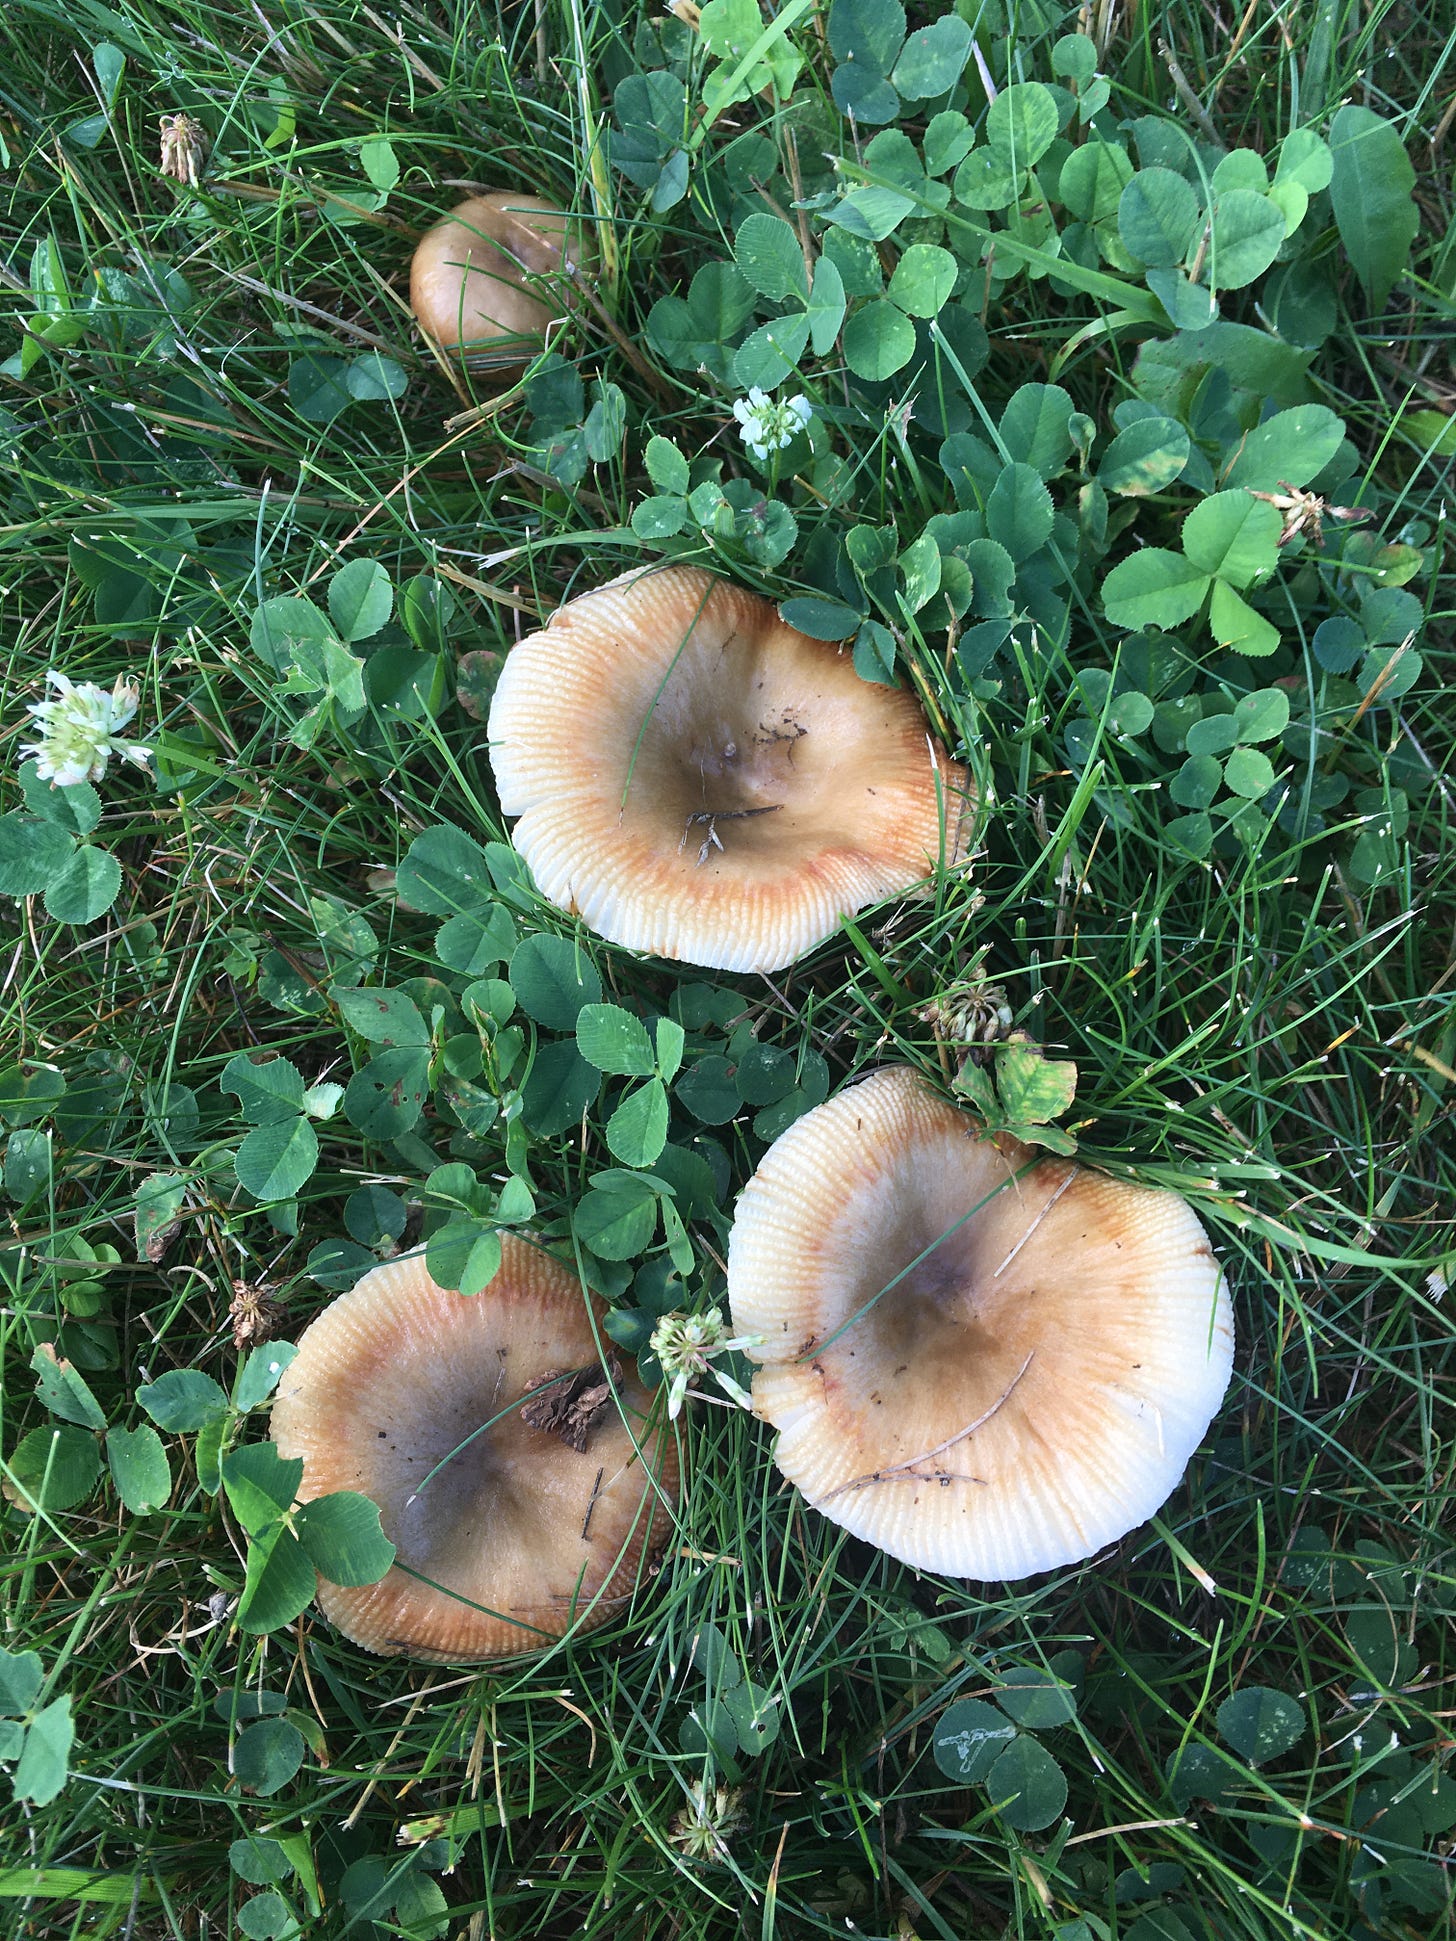 A view of 3 large white/grown mushrooms shaped like bowls from above, there is a fourth mushroom off to the top right side, and they are growing within green grass and clover.